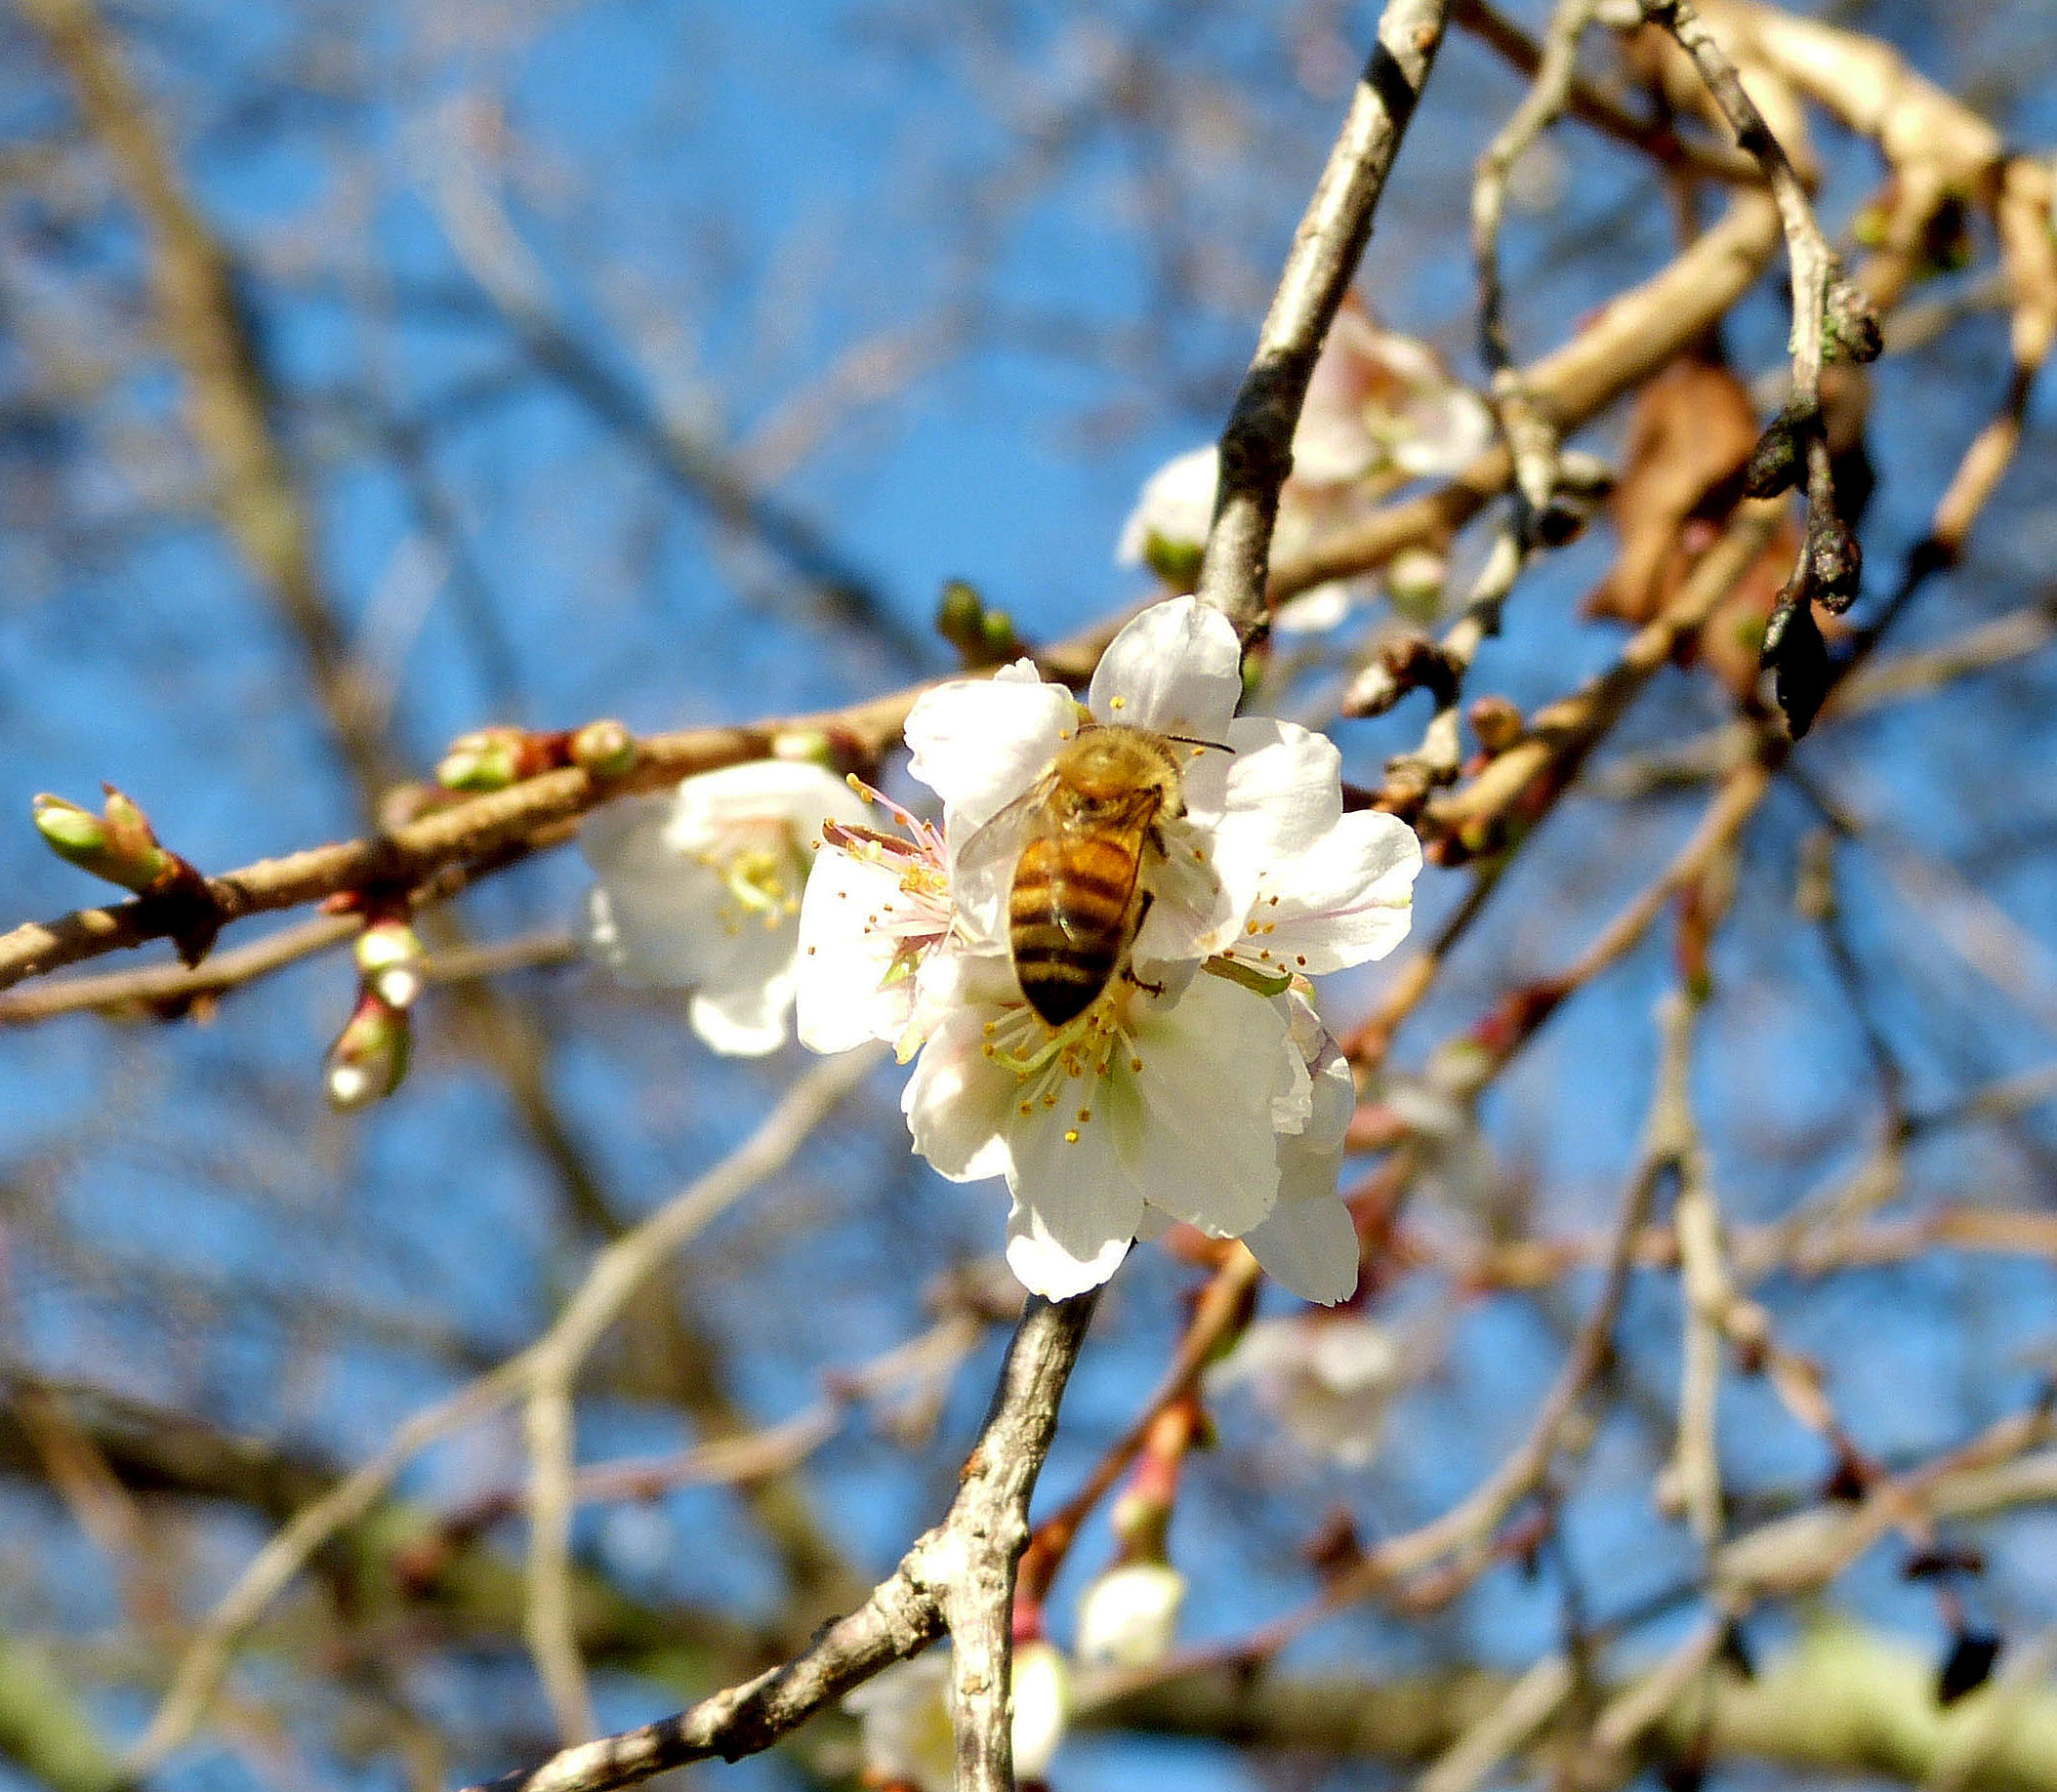 Out of season bloom on a Fugi Cherry in the Rose Garden attracted a hardy honey bee